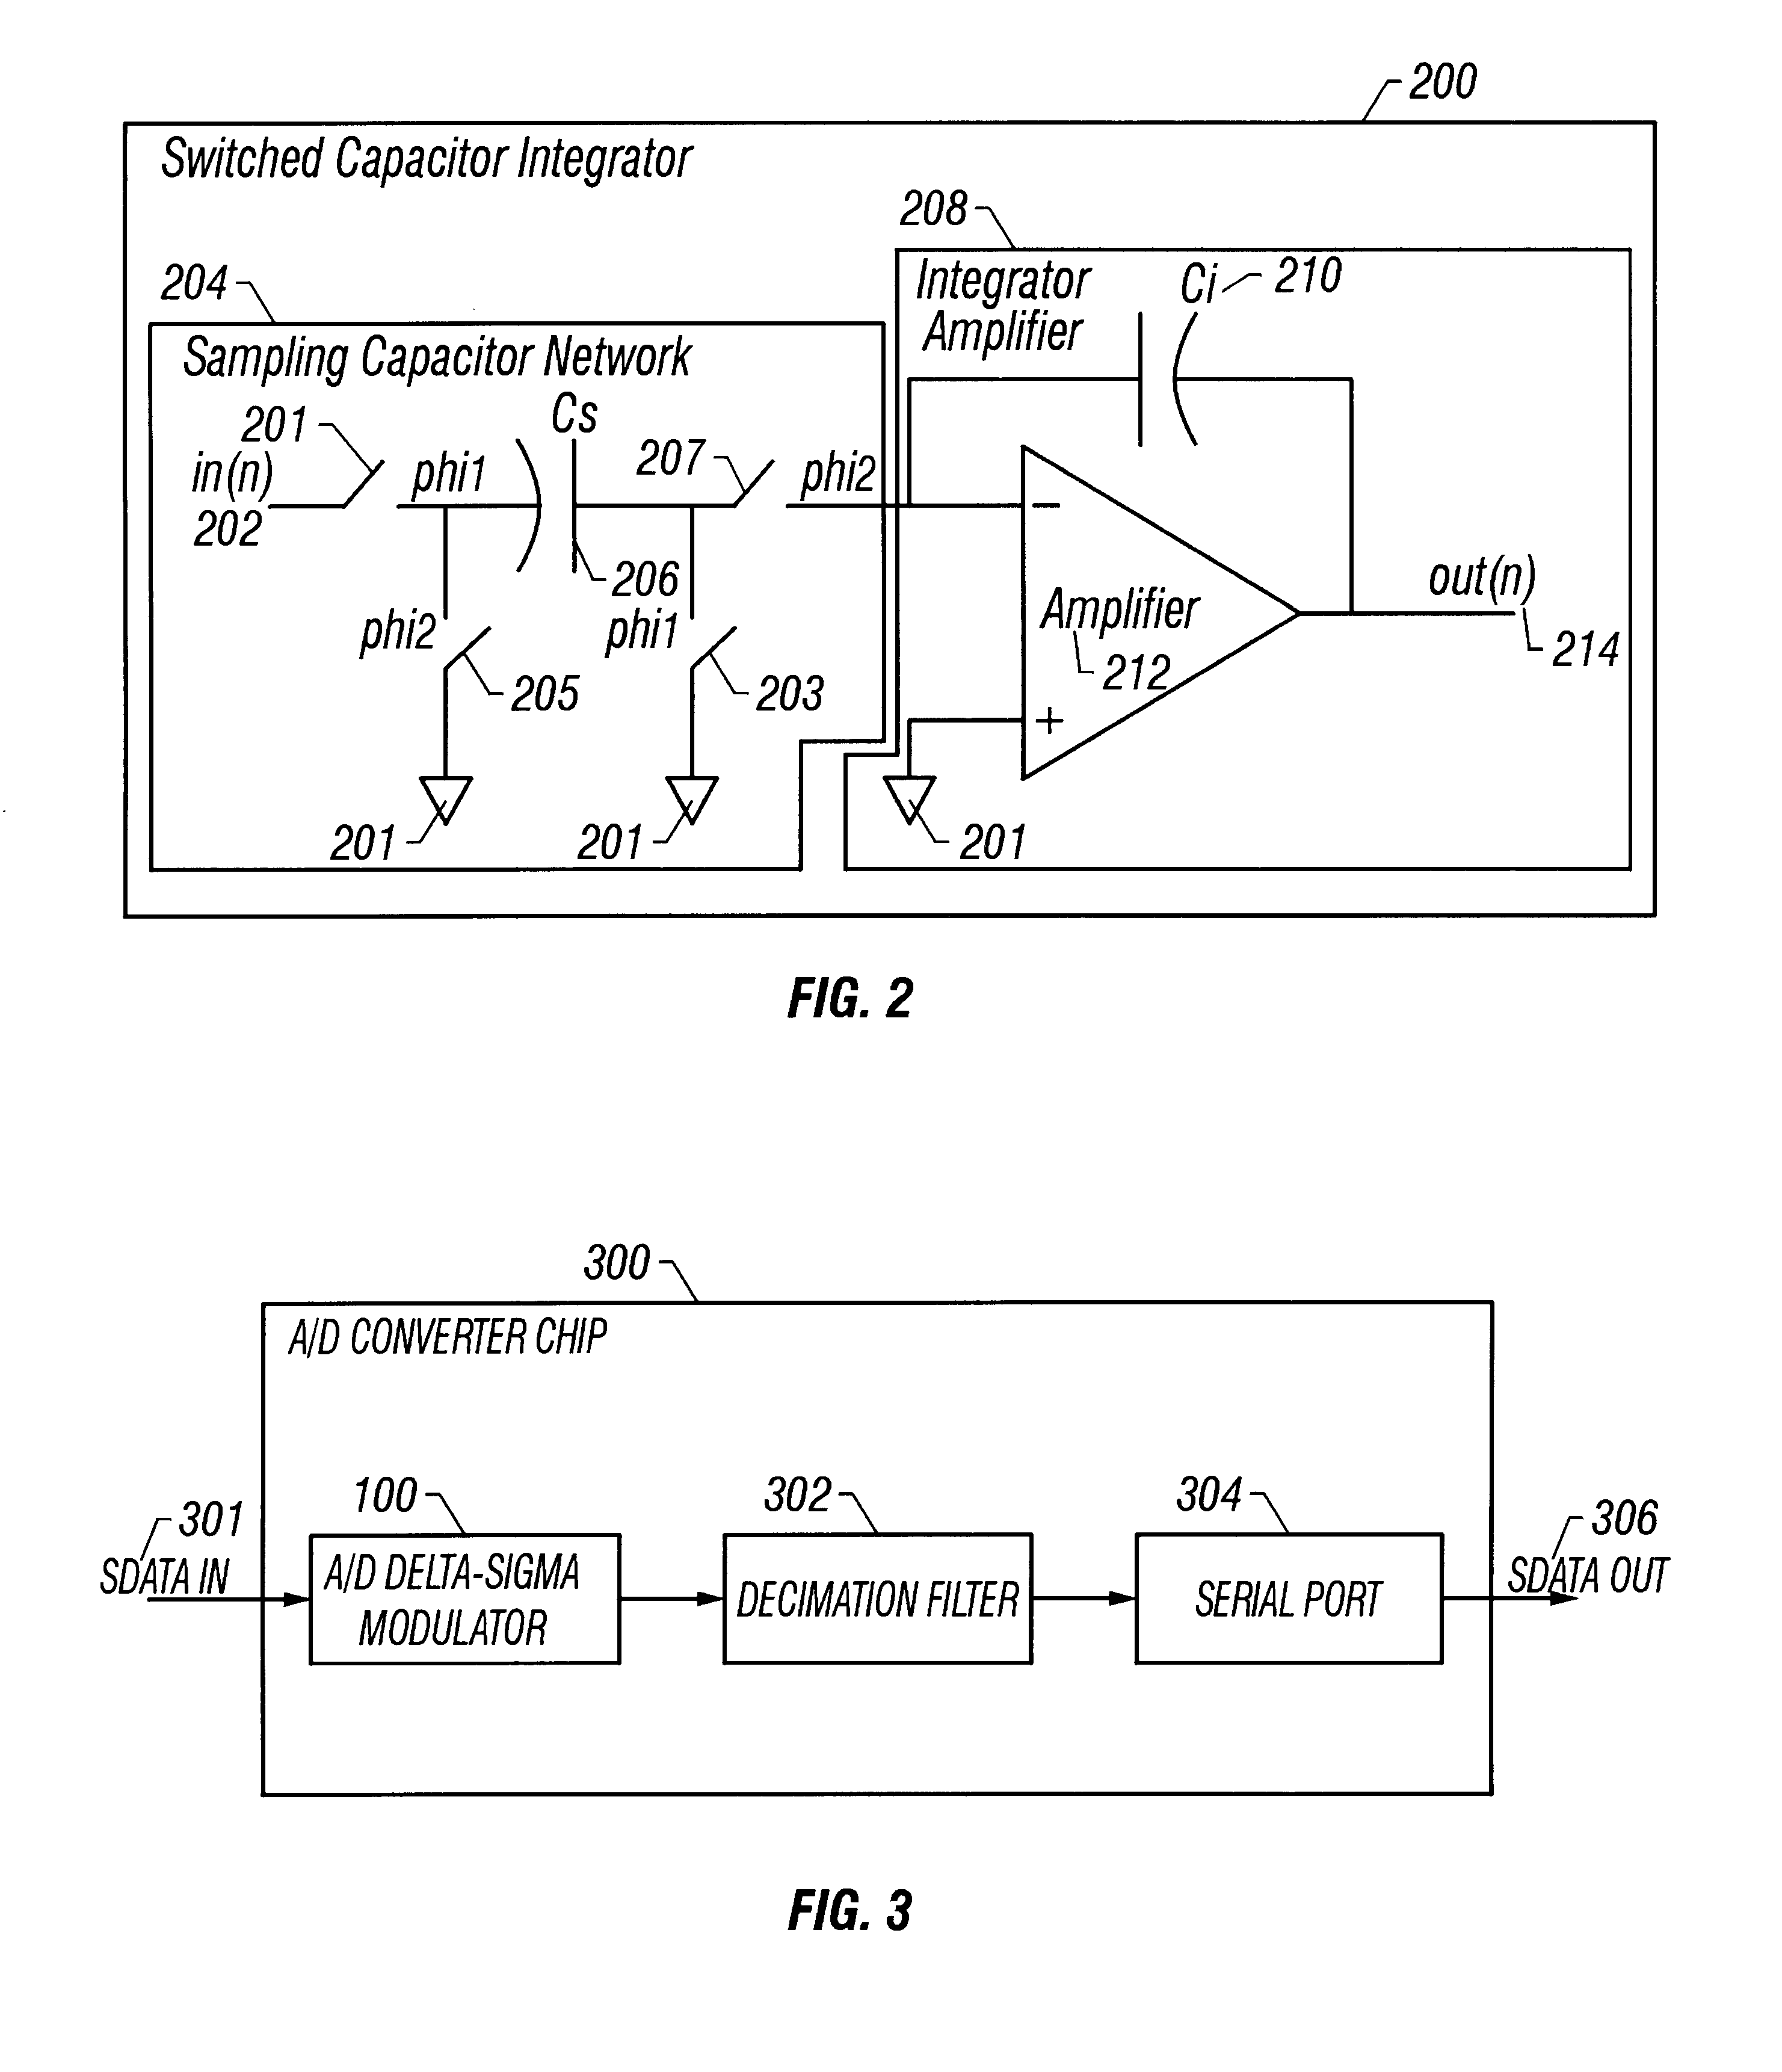 Method and system for operating two or more integrators with different power supplies for an analog-to-digital delta-sigma modulator